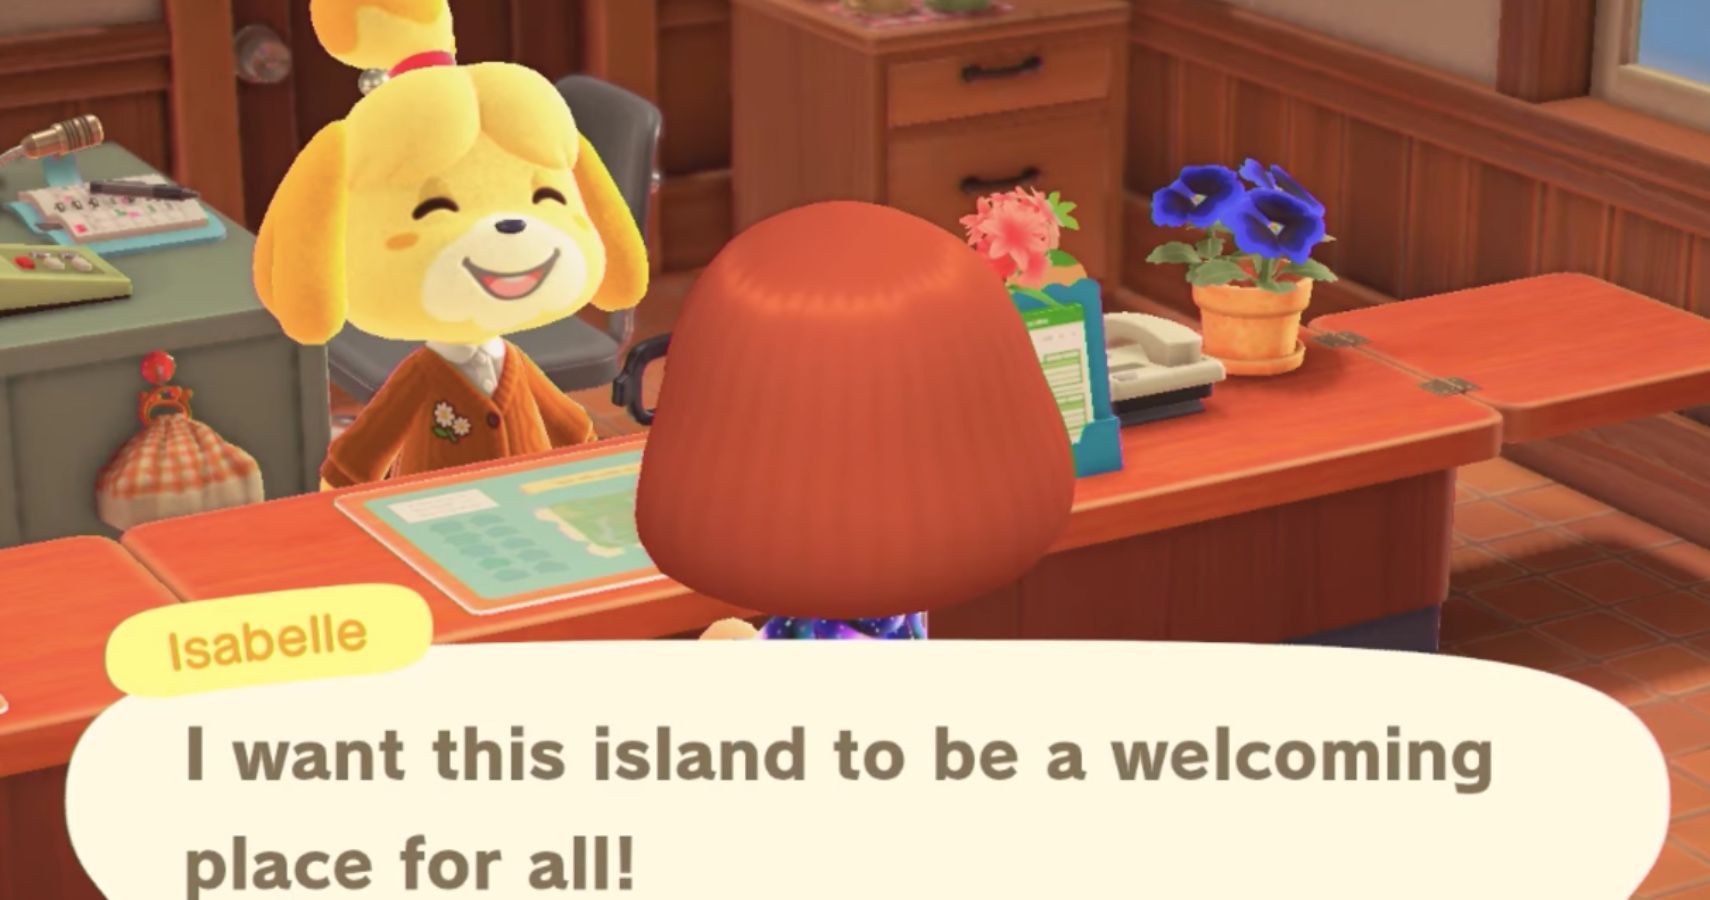 Player talking to Isabelle.